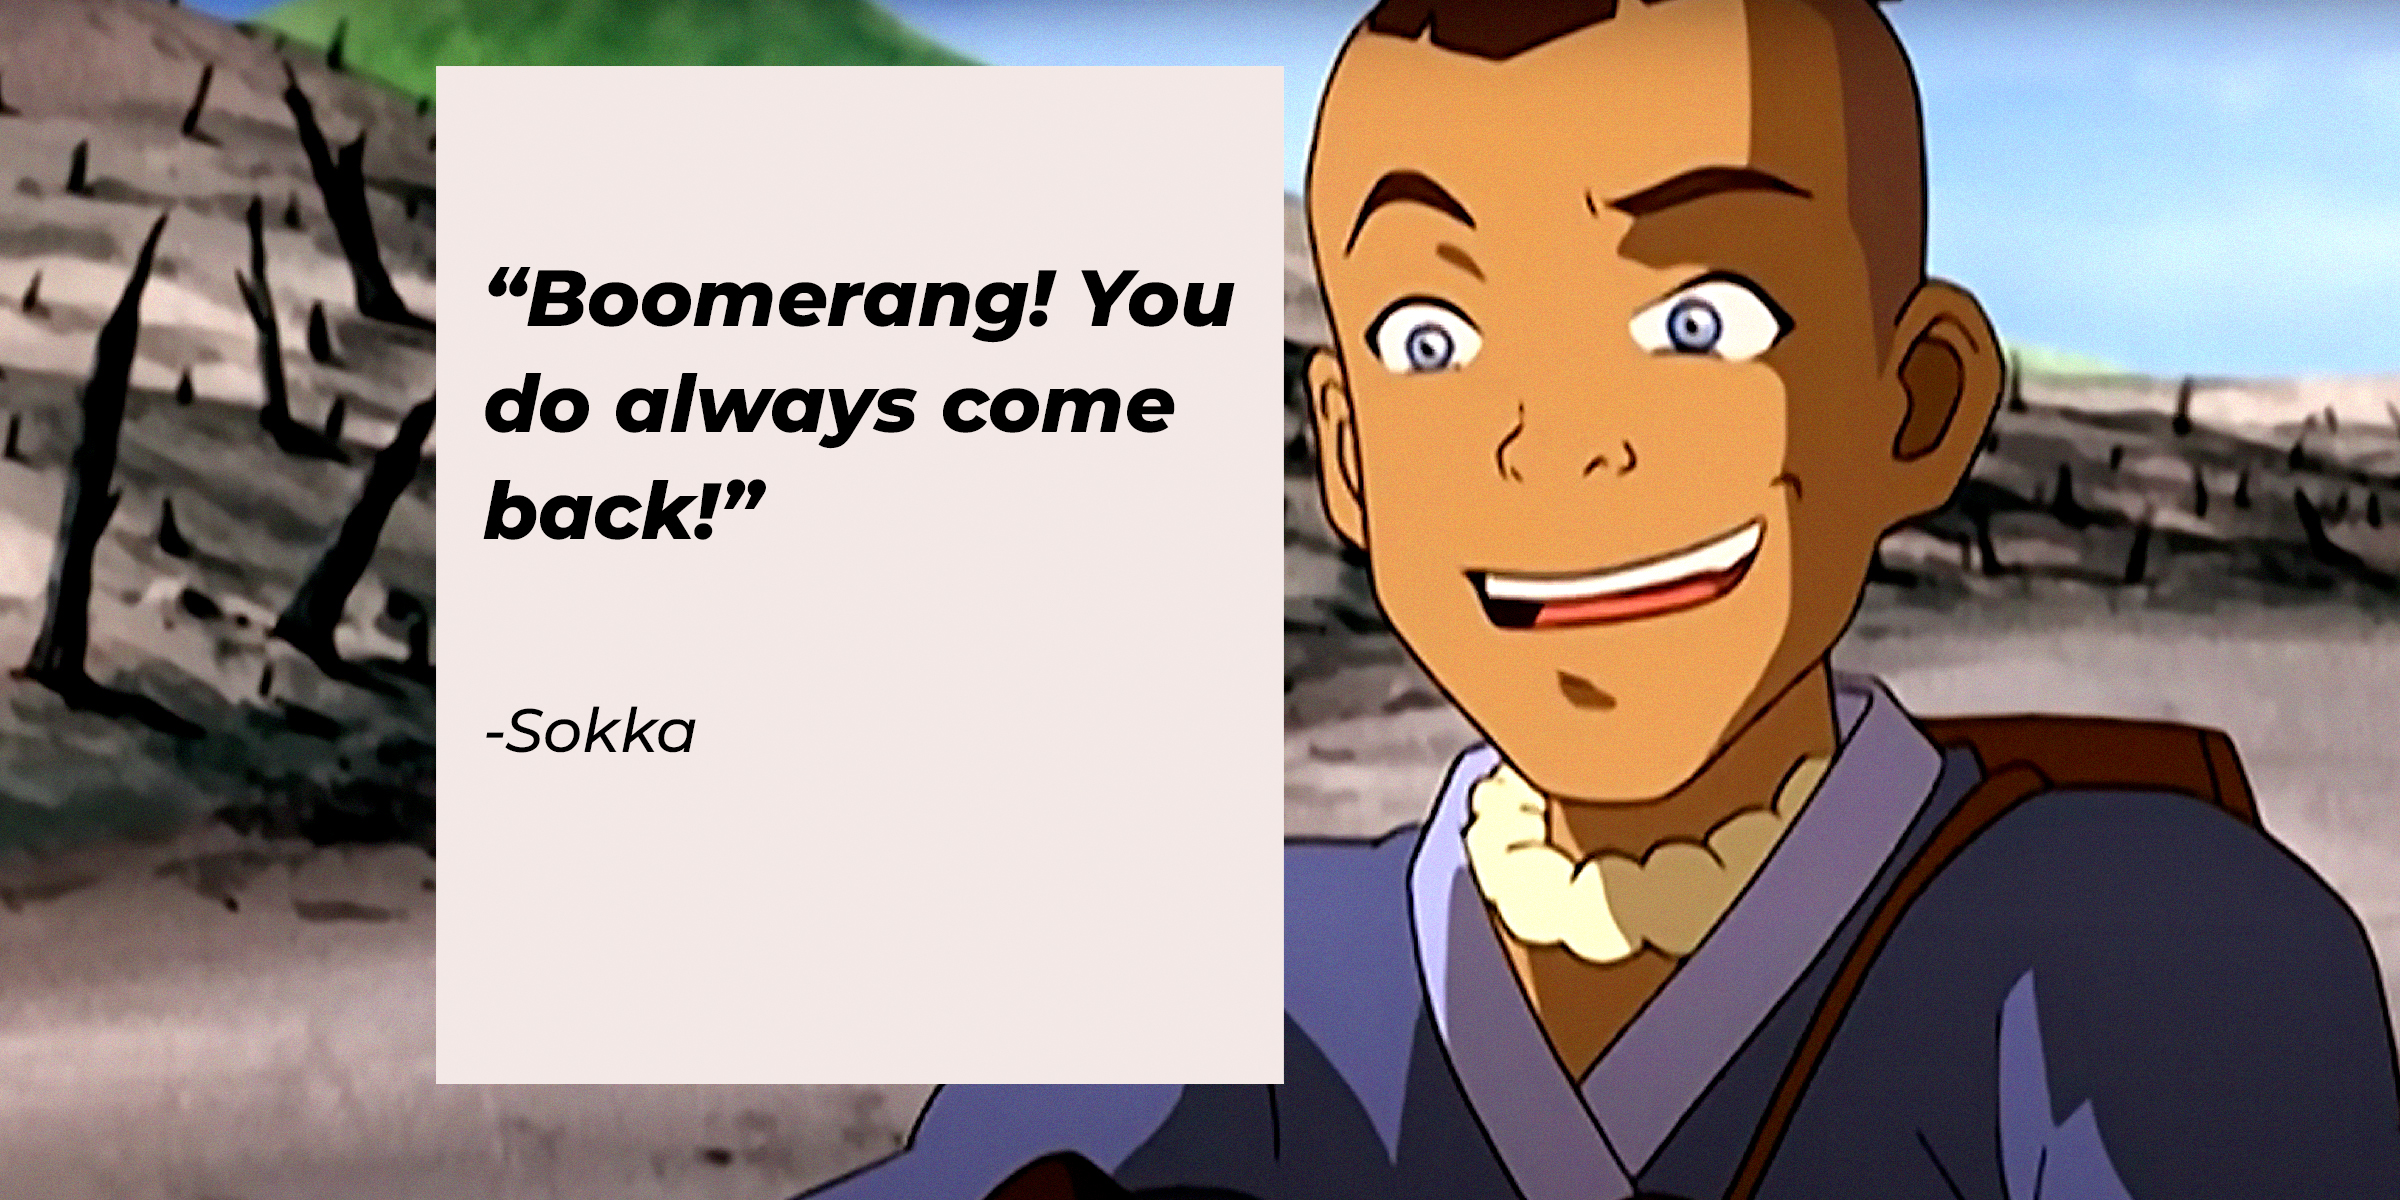 Sokka, with his quote: “Boomerang! You do always come back!” | Source: Youtube.com/TeamAvatar